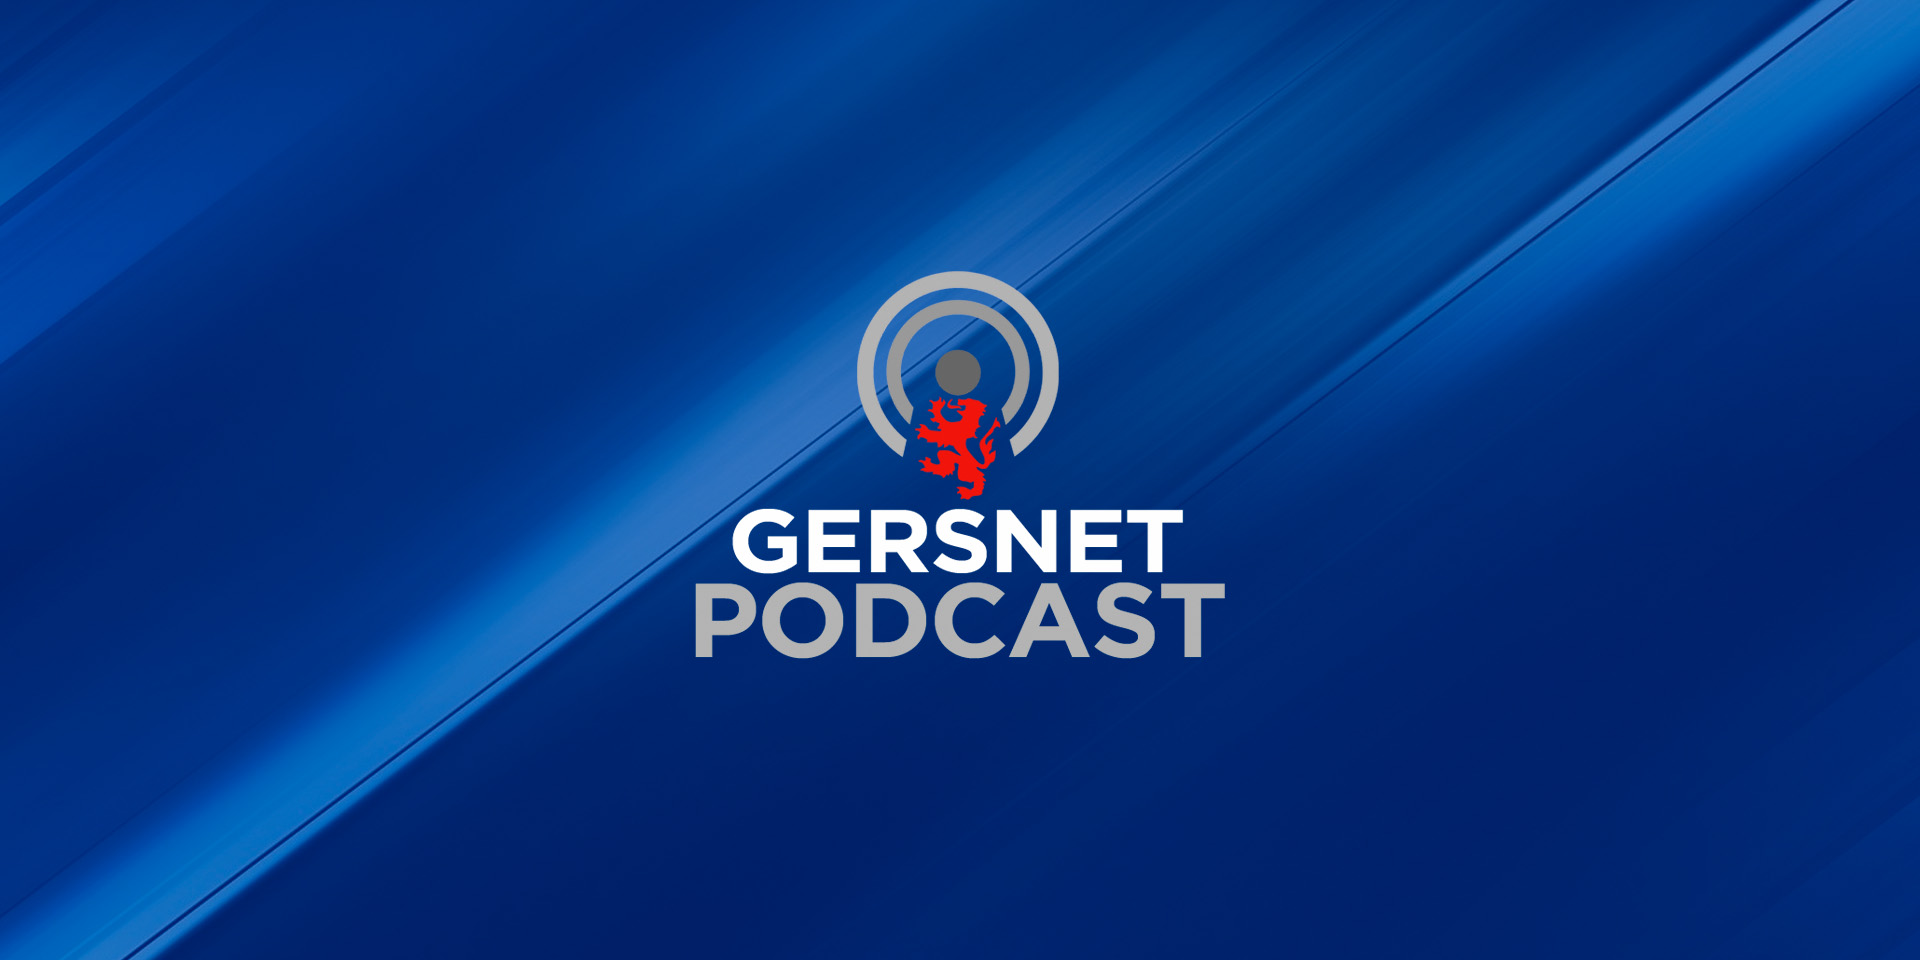 Gersnet Podcast 301 - Dropping points v the Dons